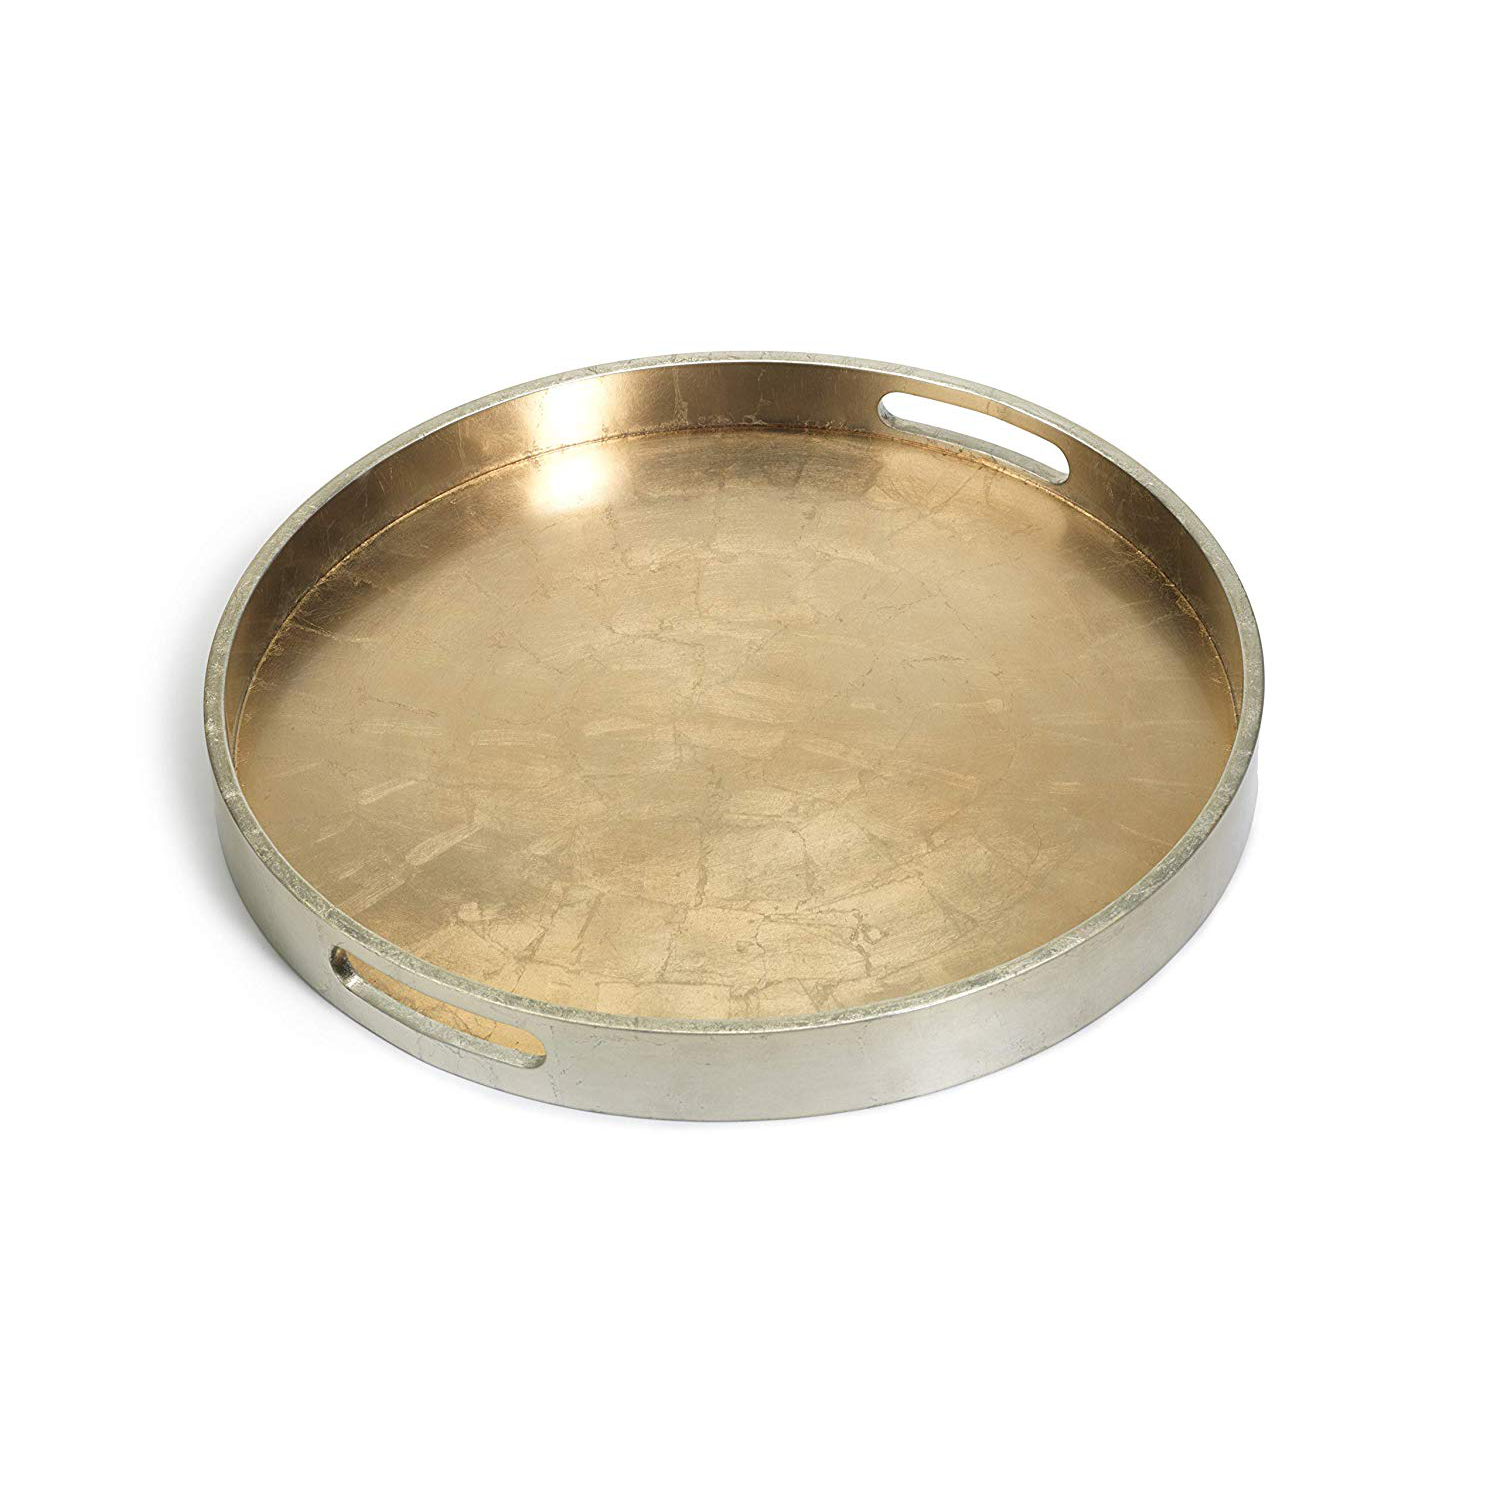 Antique Gold Serving Tray